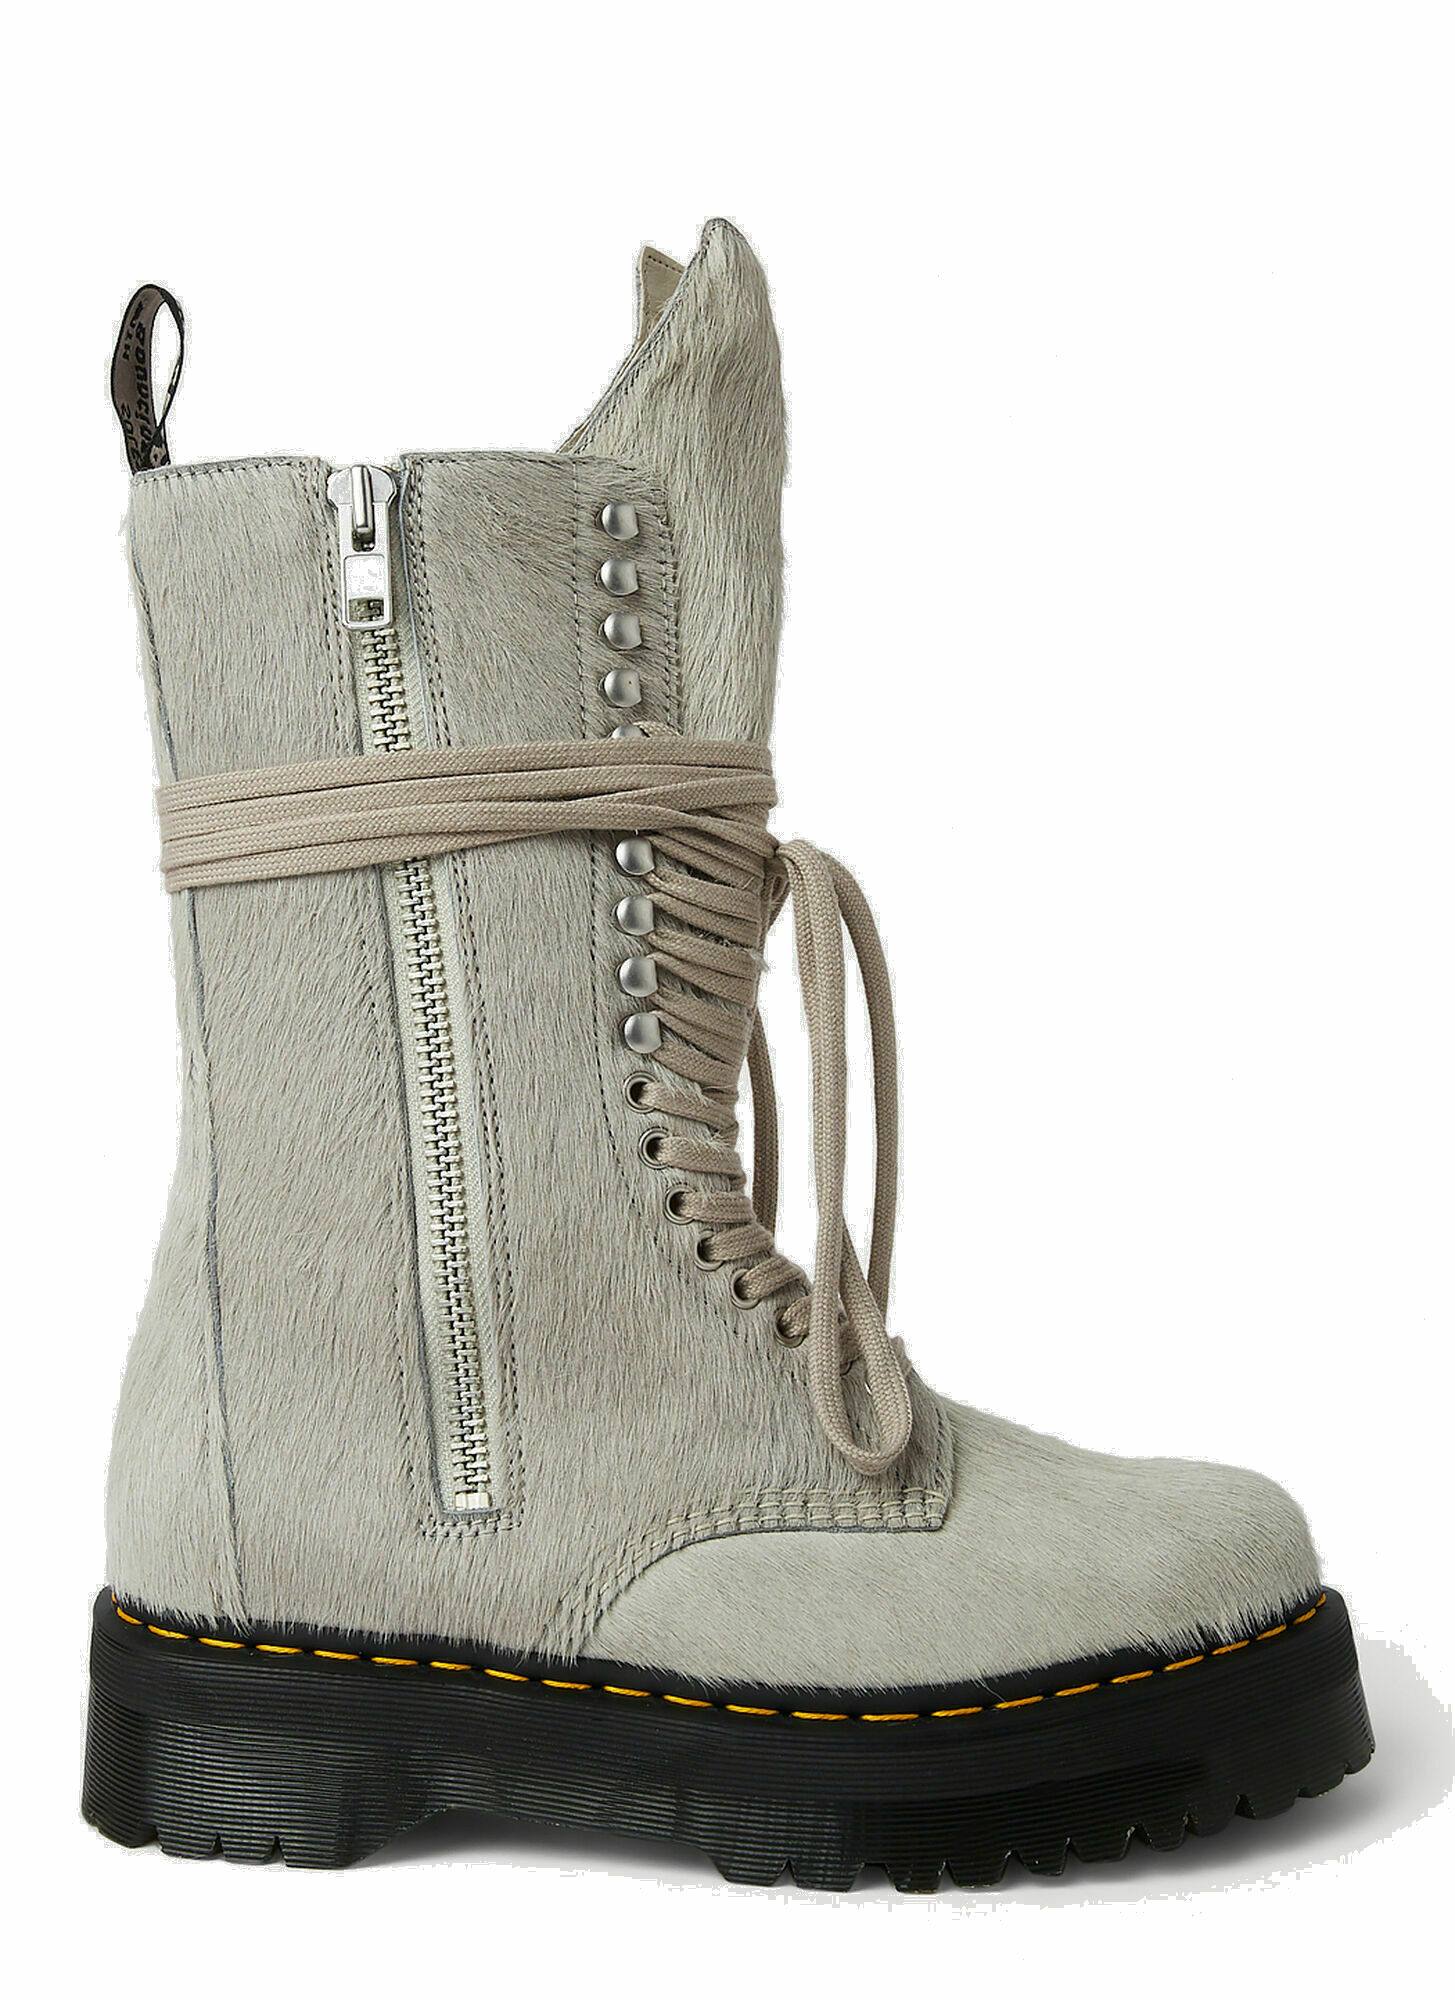 Photo: Quad Sole Boots in Grey